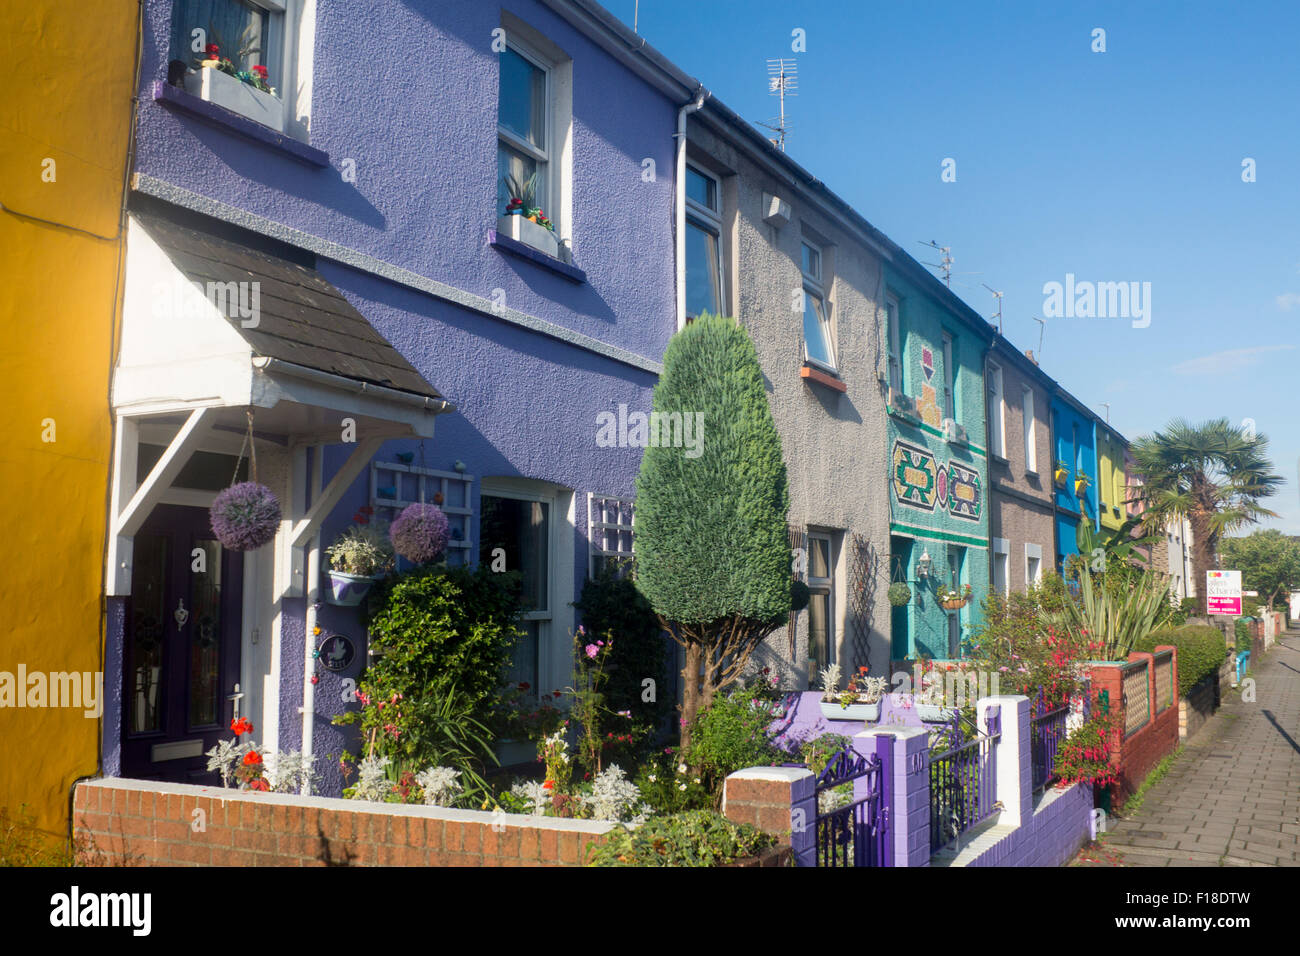 Colourful painted terrace terraced houses cottages Roath Cardiff Wales UK Stock Photo